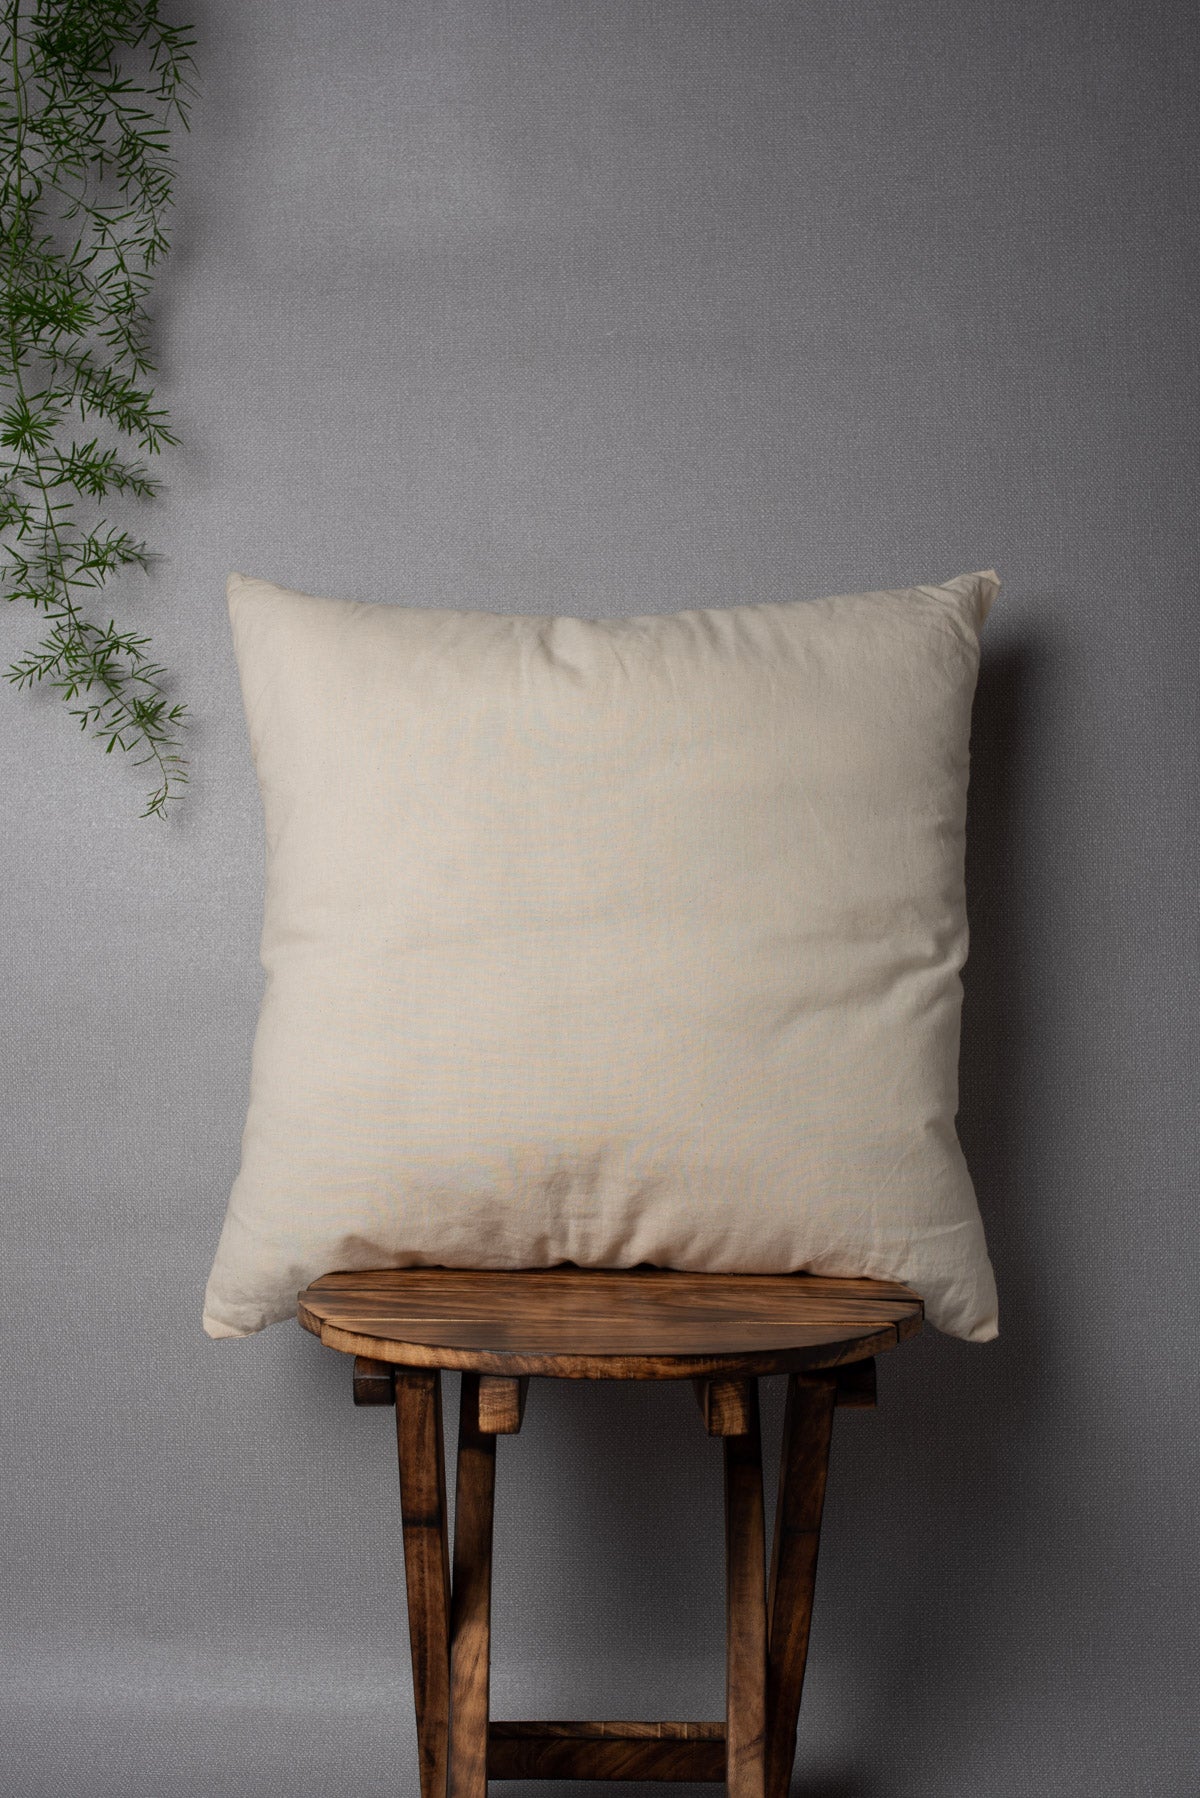 Cushion Filler with Man Made Fiber Filling and Cotton Cover - 16"